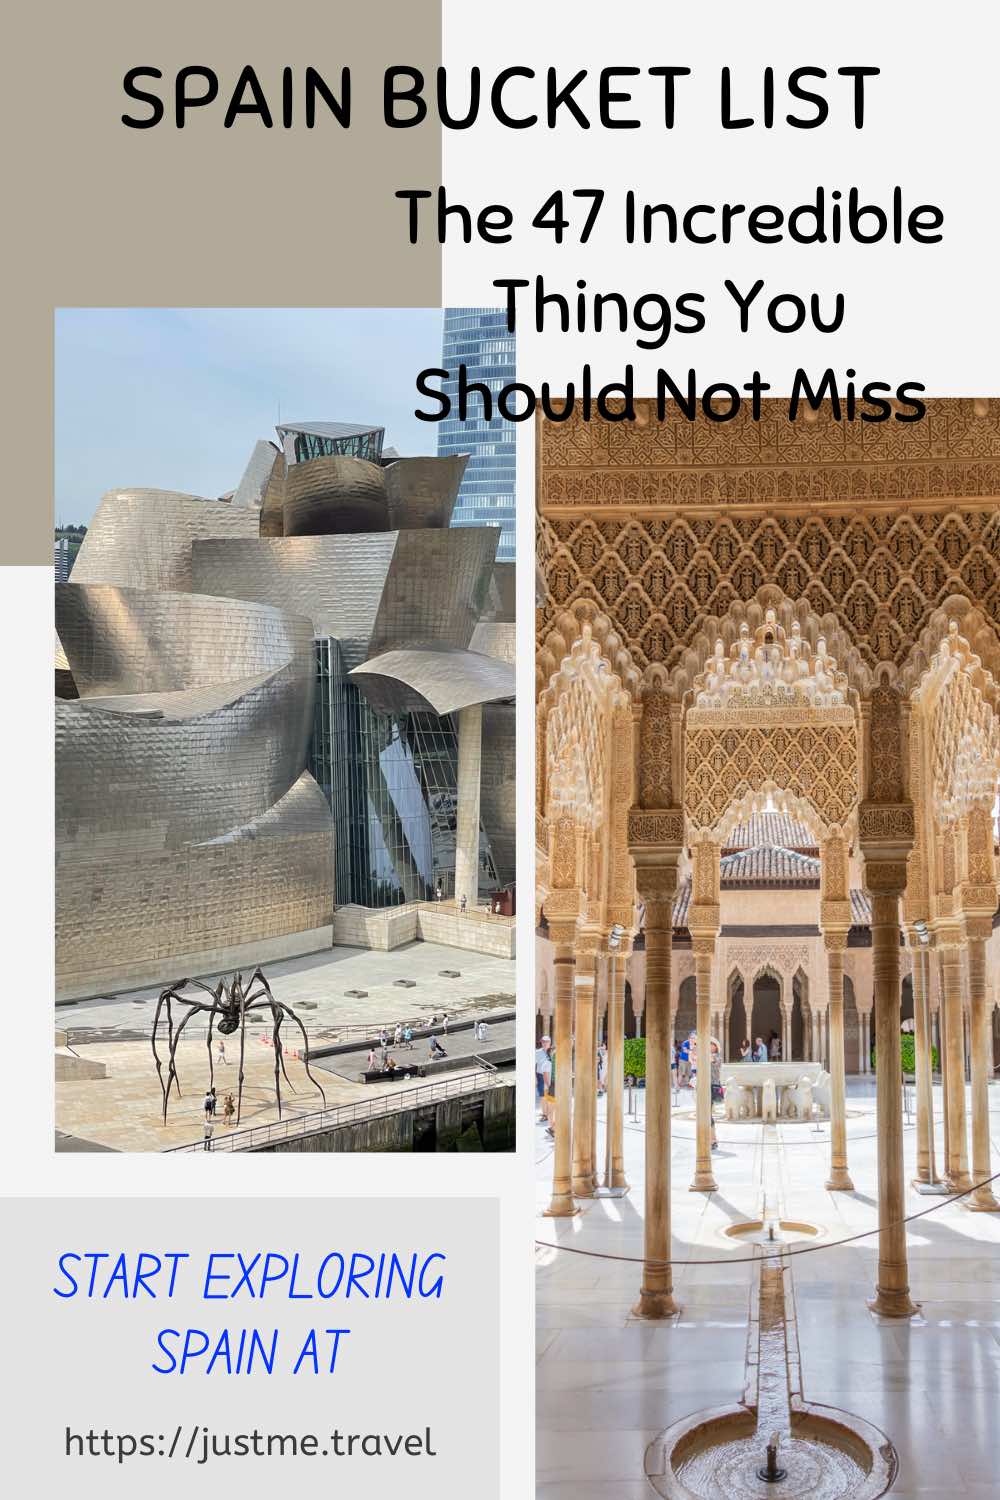 The image has two photos. One shows a very modern building covered in silver tiles with a spider sculpture in front of the building. The second photo shows a marble courtyard with a whoite fountain in the middle supported by white lions. The courtyard is surrounded by marble pillars covered in intricate Islamic designs.